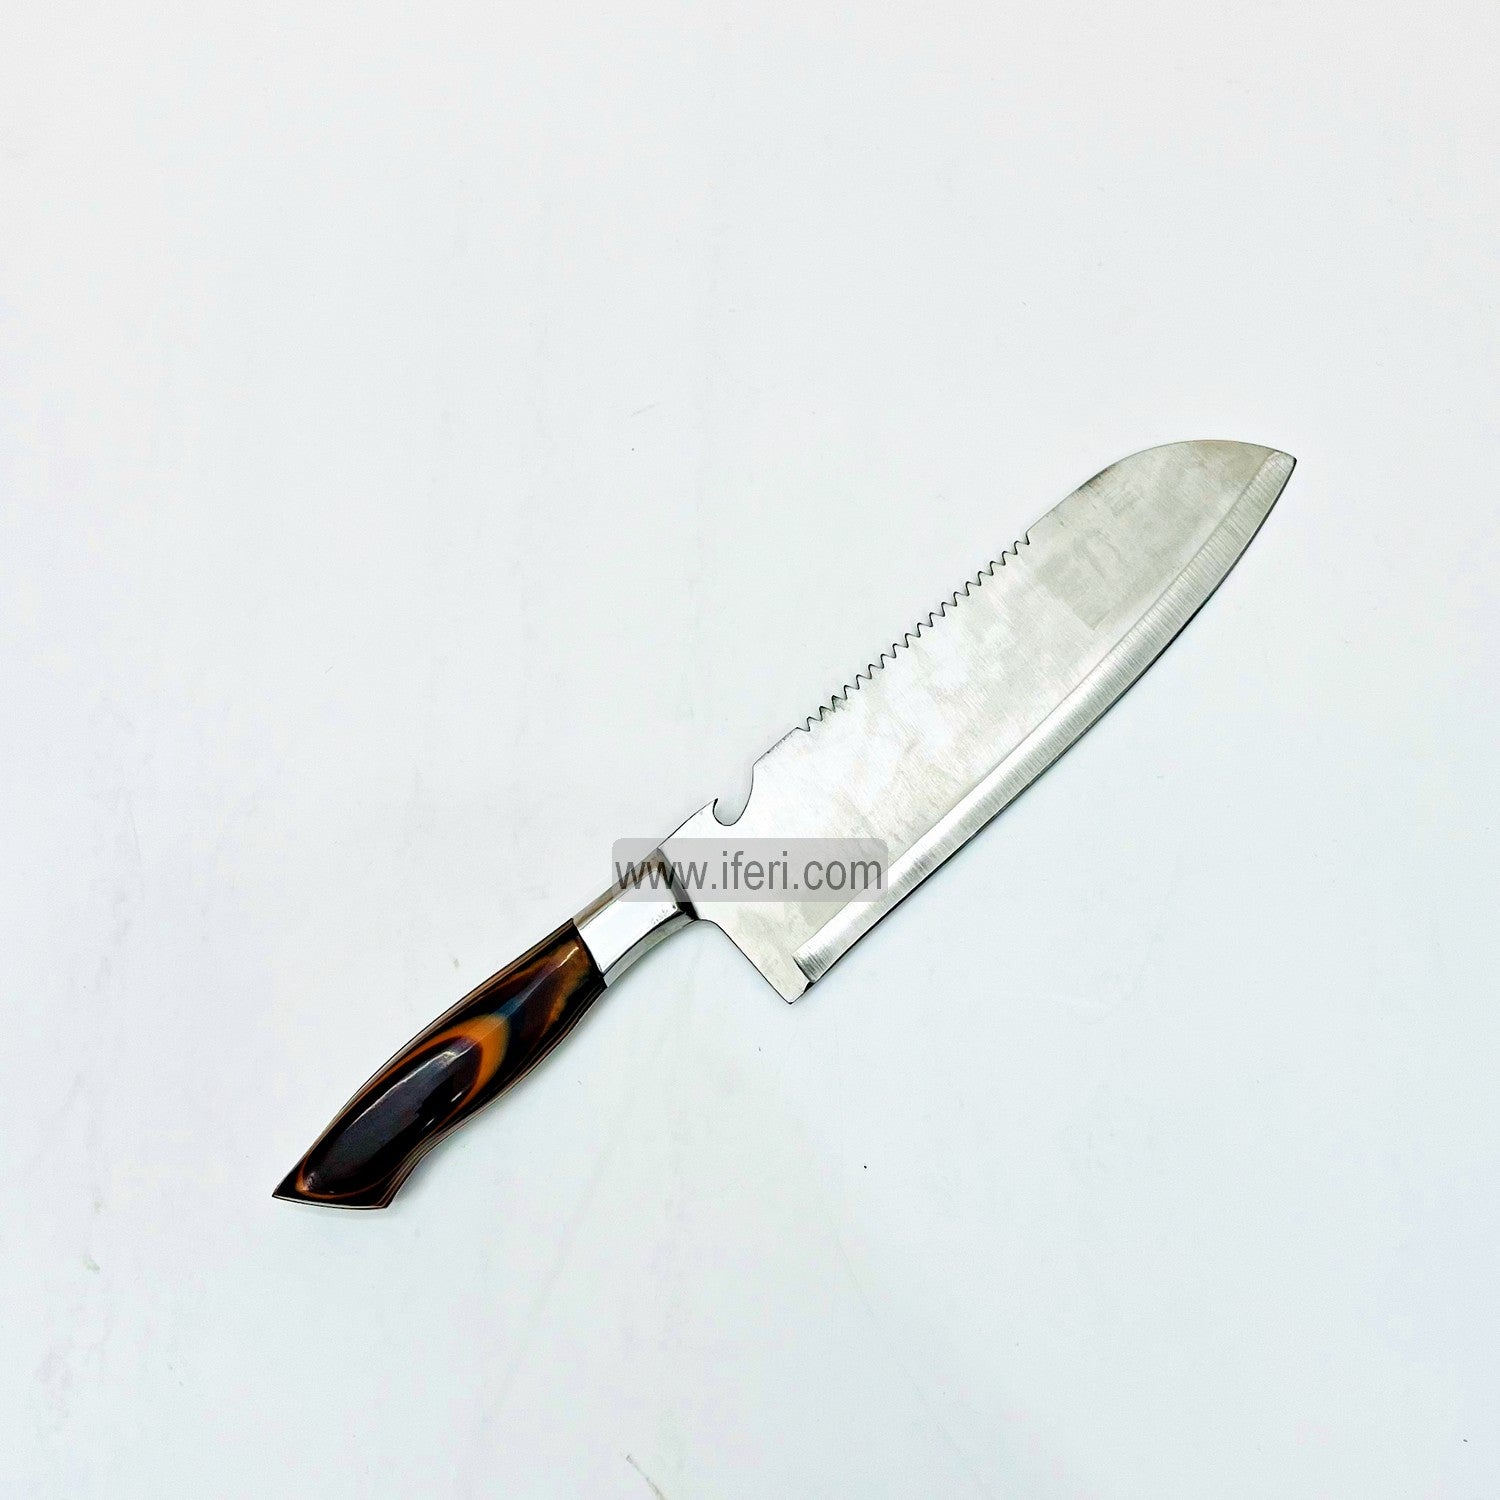 12 Inch Stainless Steel Kitchen Knife with Can Opener LB3636